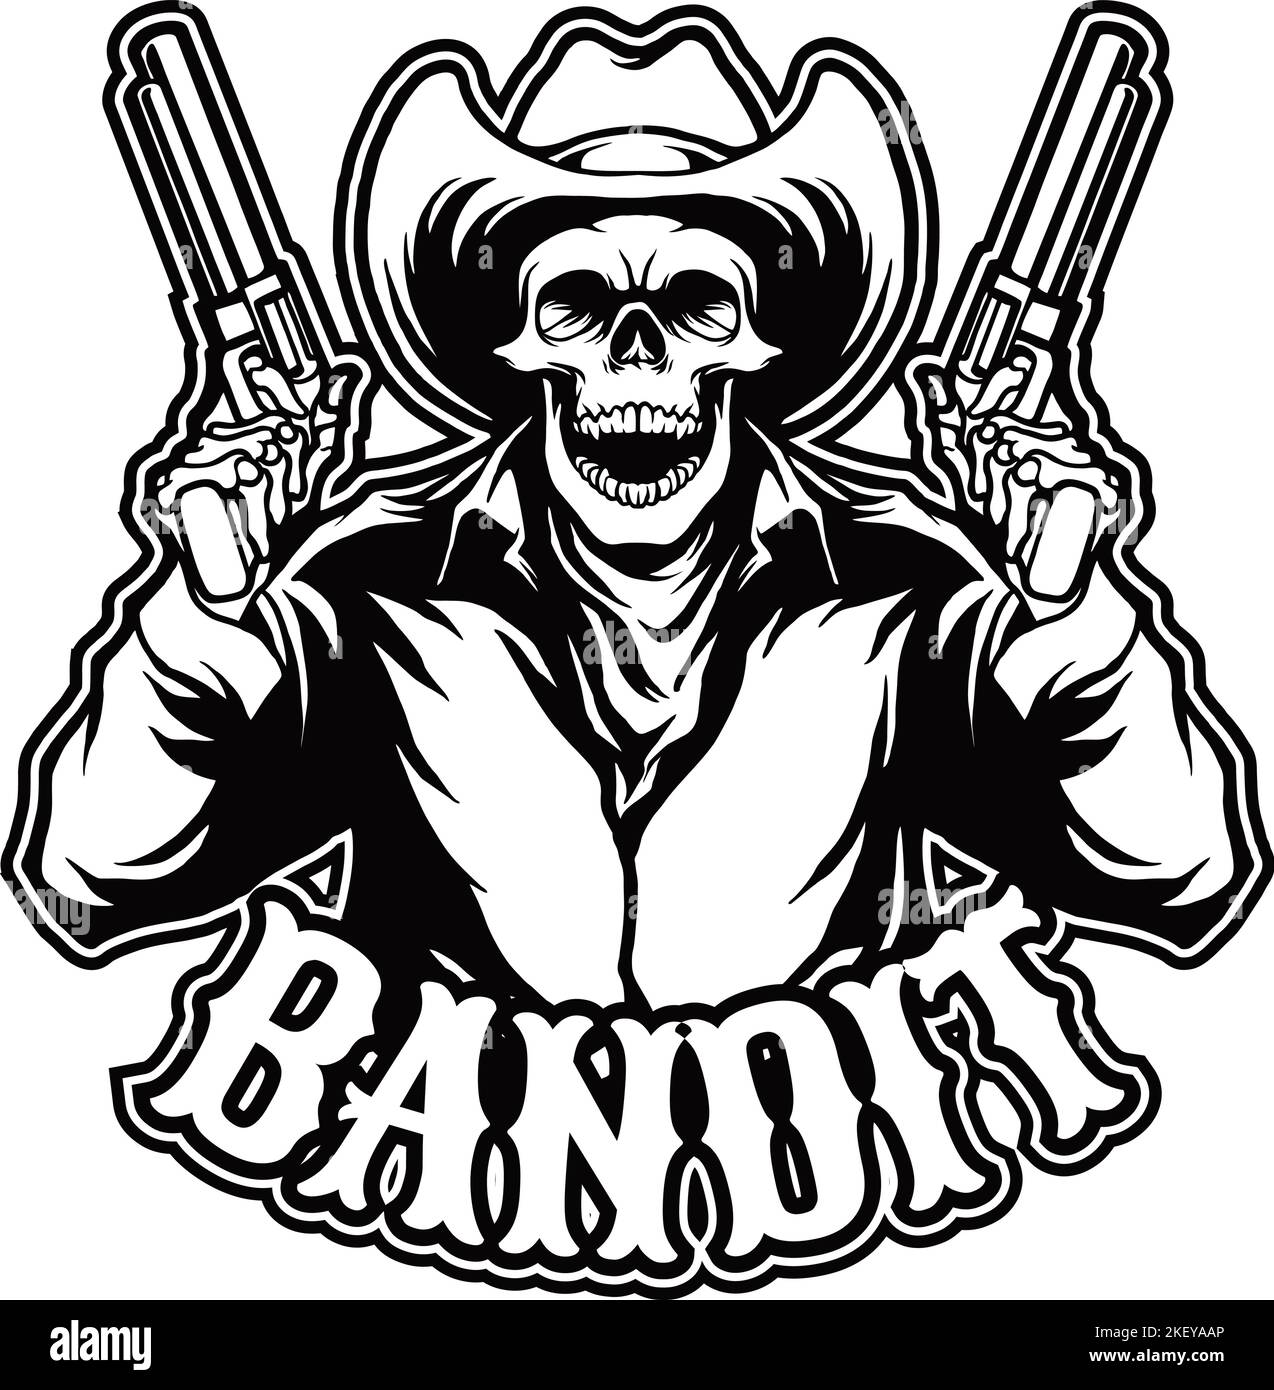 Skull Cowboy Bandit Monochrome Logo vector illustrations for your work logo, merchandise t-shirt, stickers and label designs, poster, greeting cards Stock Vector